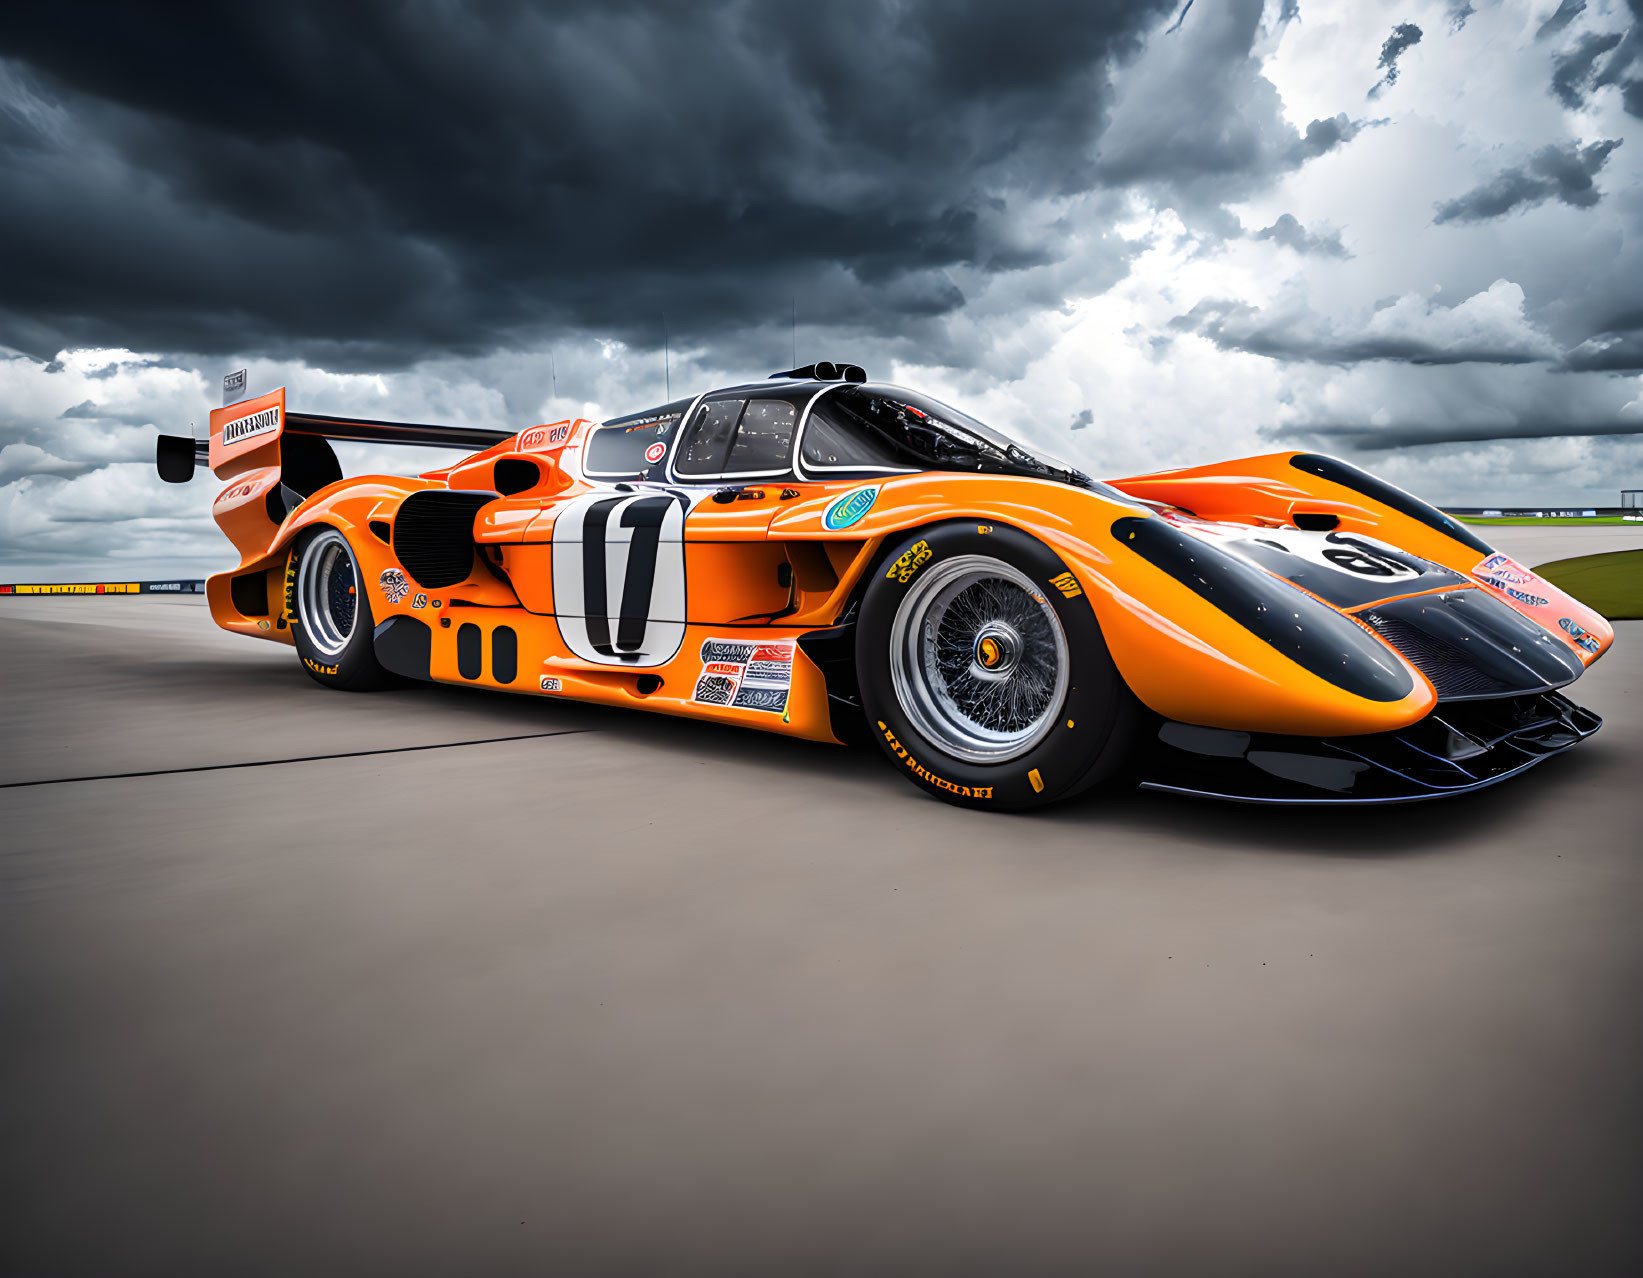 Orange and Black Racing Car with Number 1 on Track Under Cloudy Sky